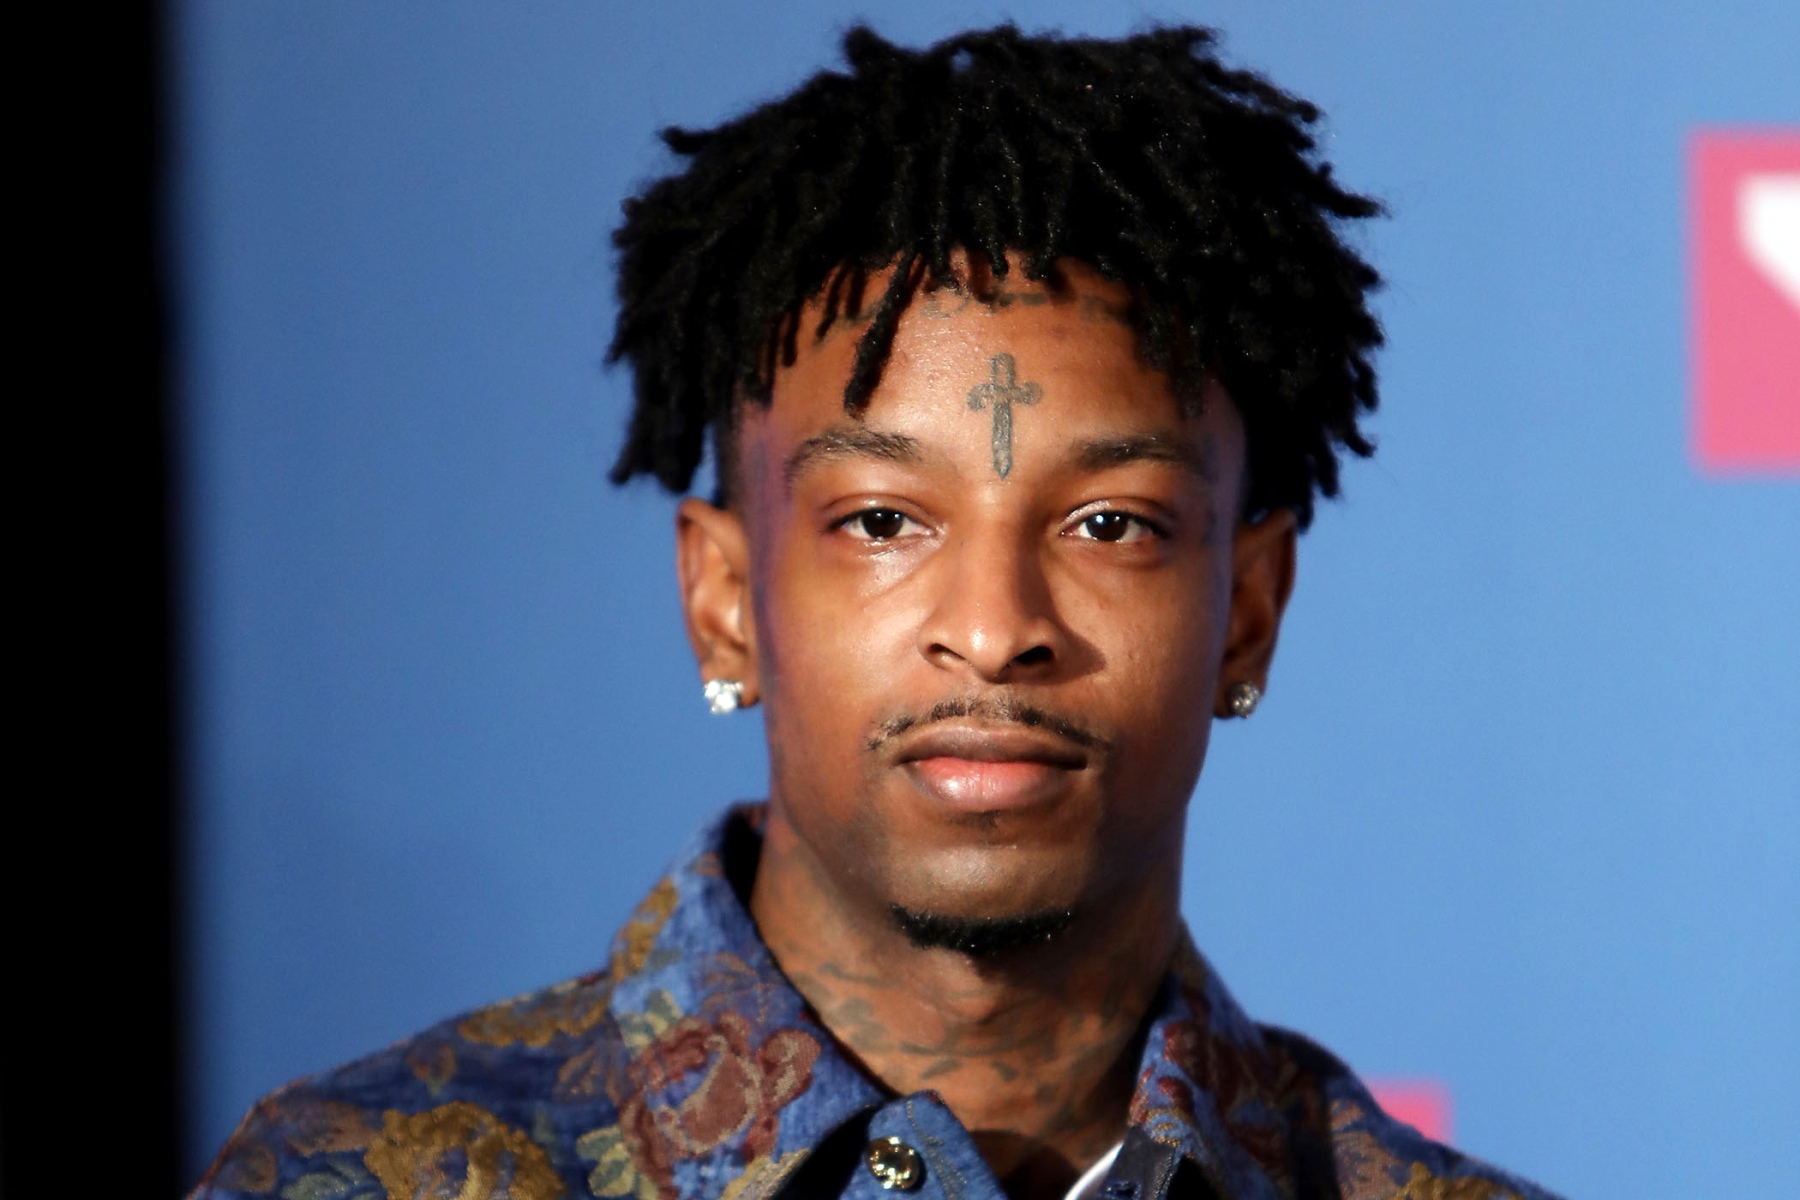 THE FEDS HAVE BUSTED 21 SAVAGE ON GUN AND LEAN CHARGES IN CONNECTION WITH THE 2019 ICE ARREST.